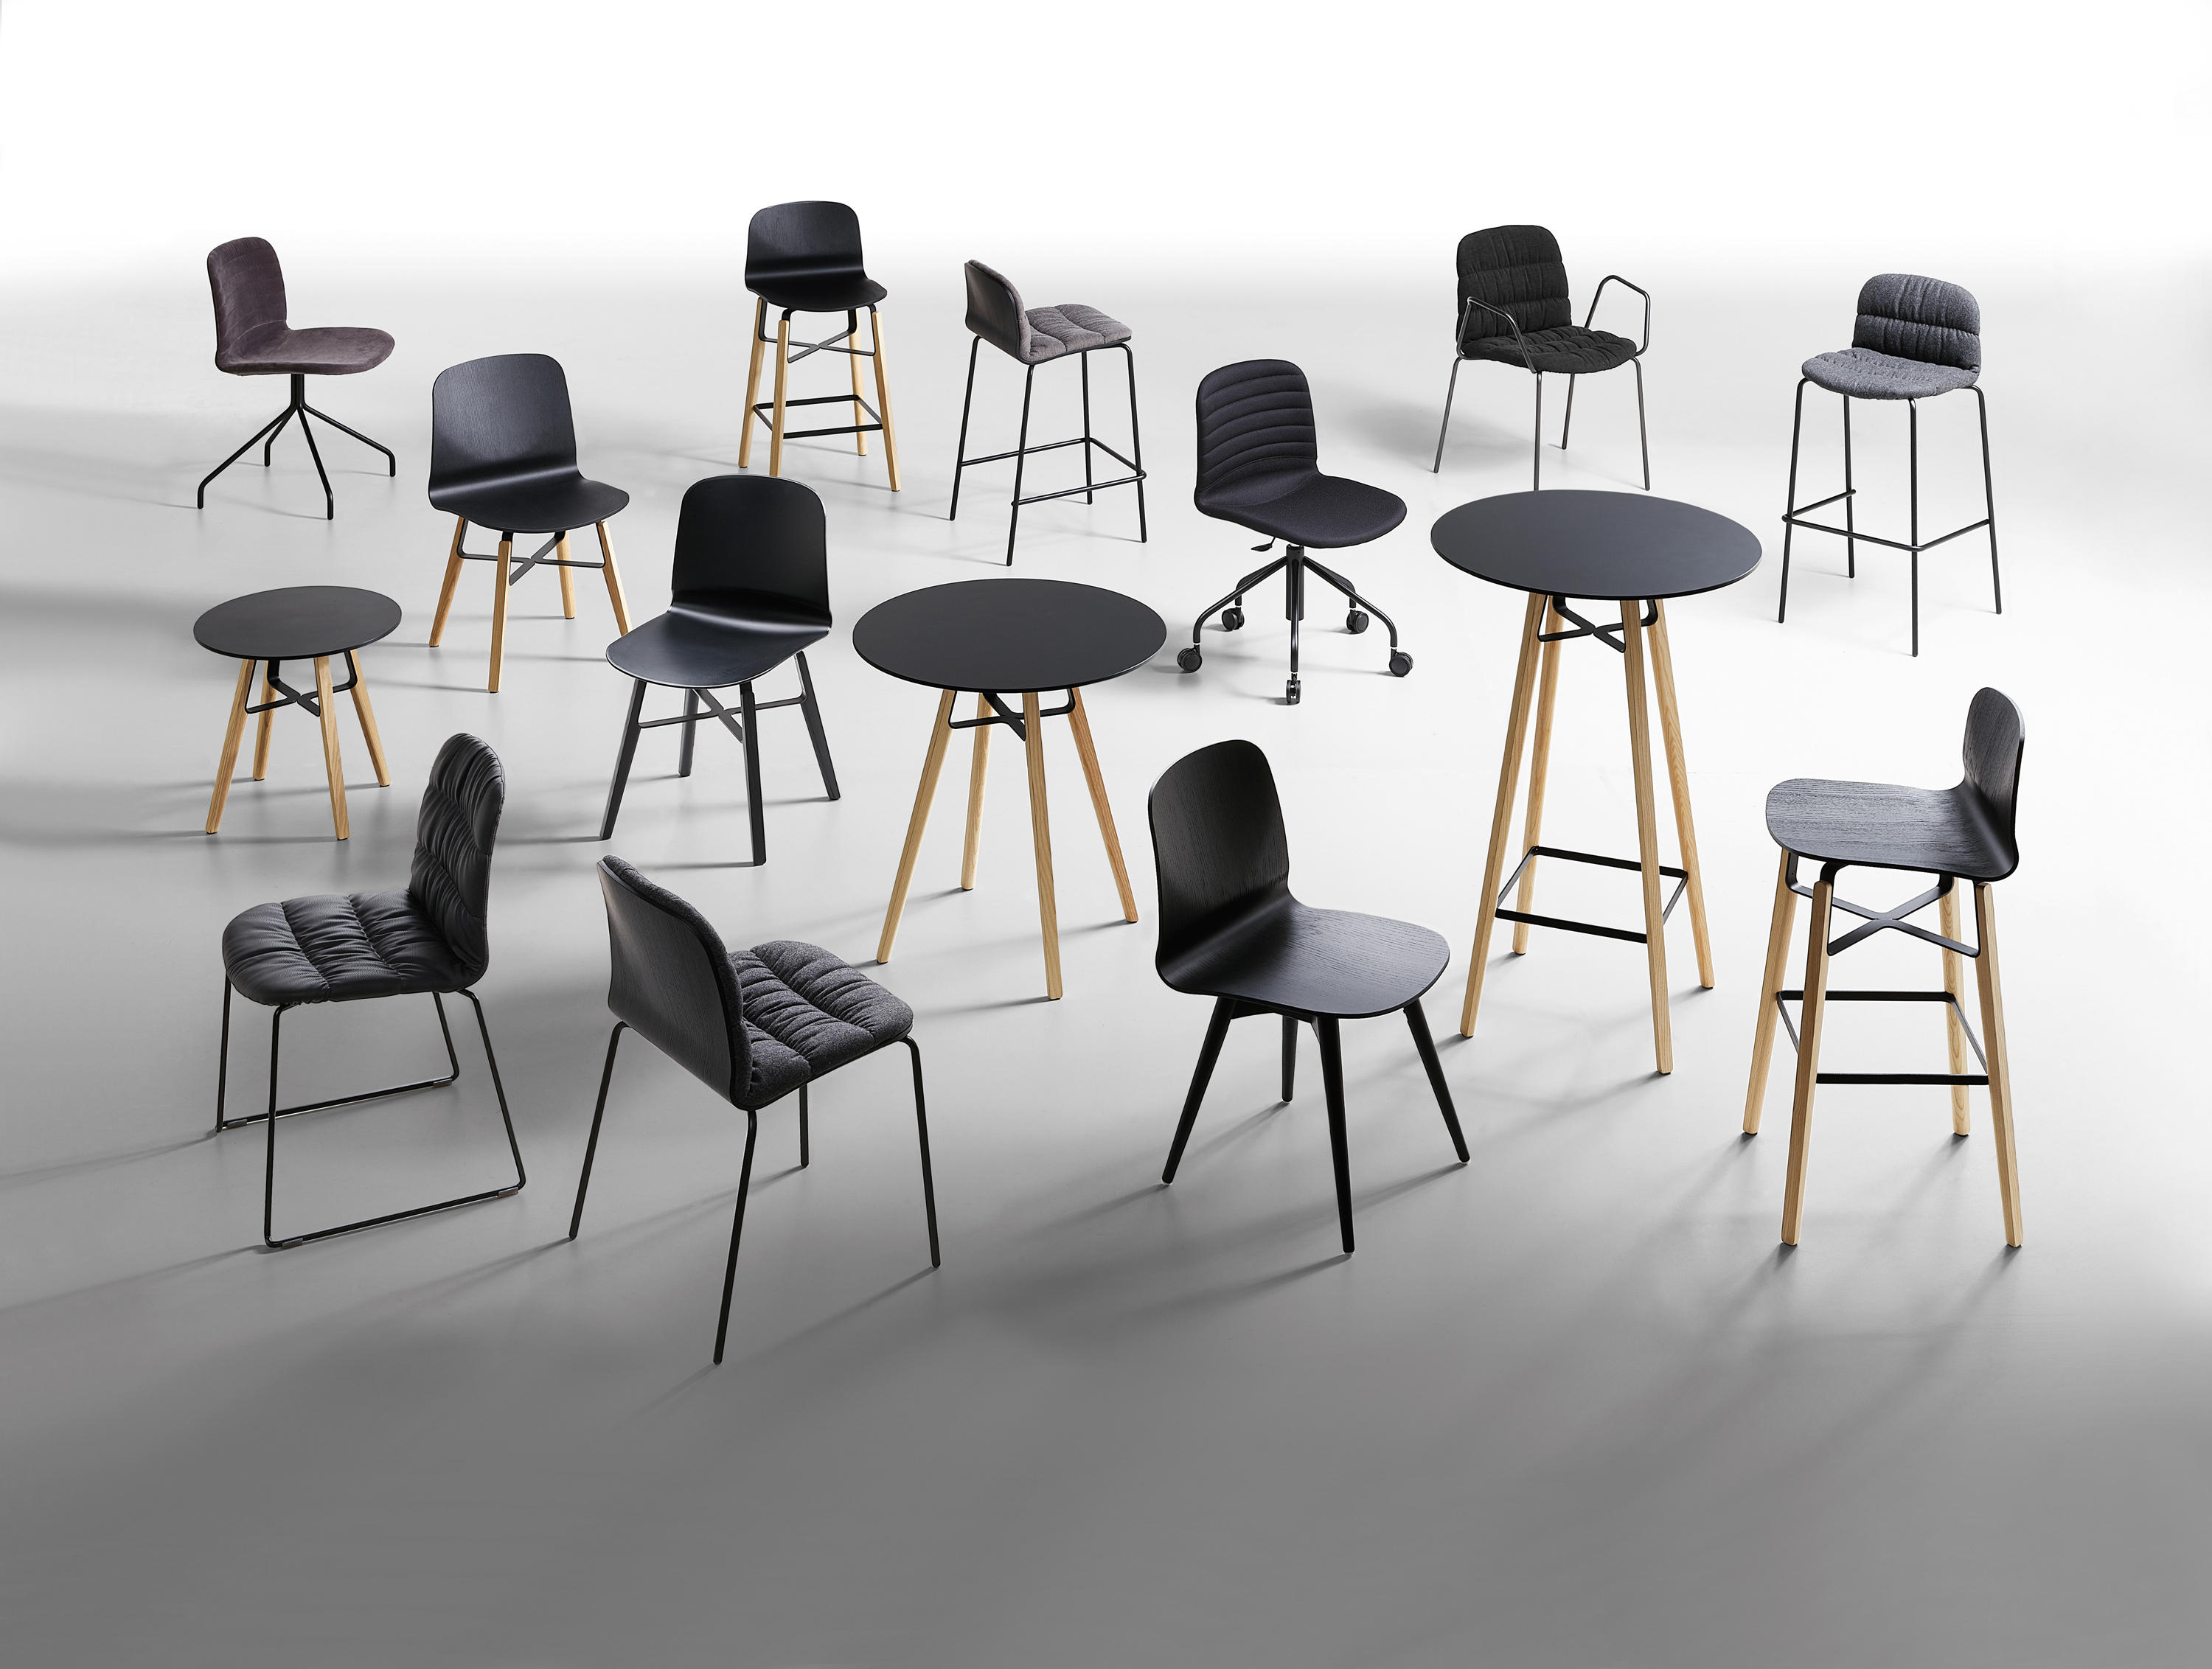 LIù T - Chairs from Midj | Architonic